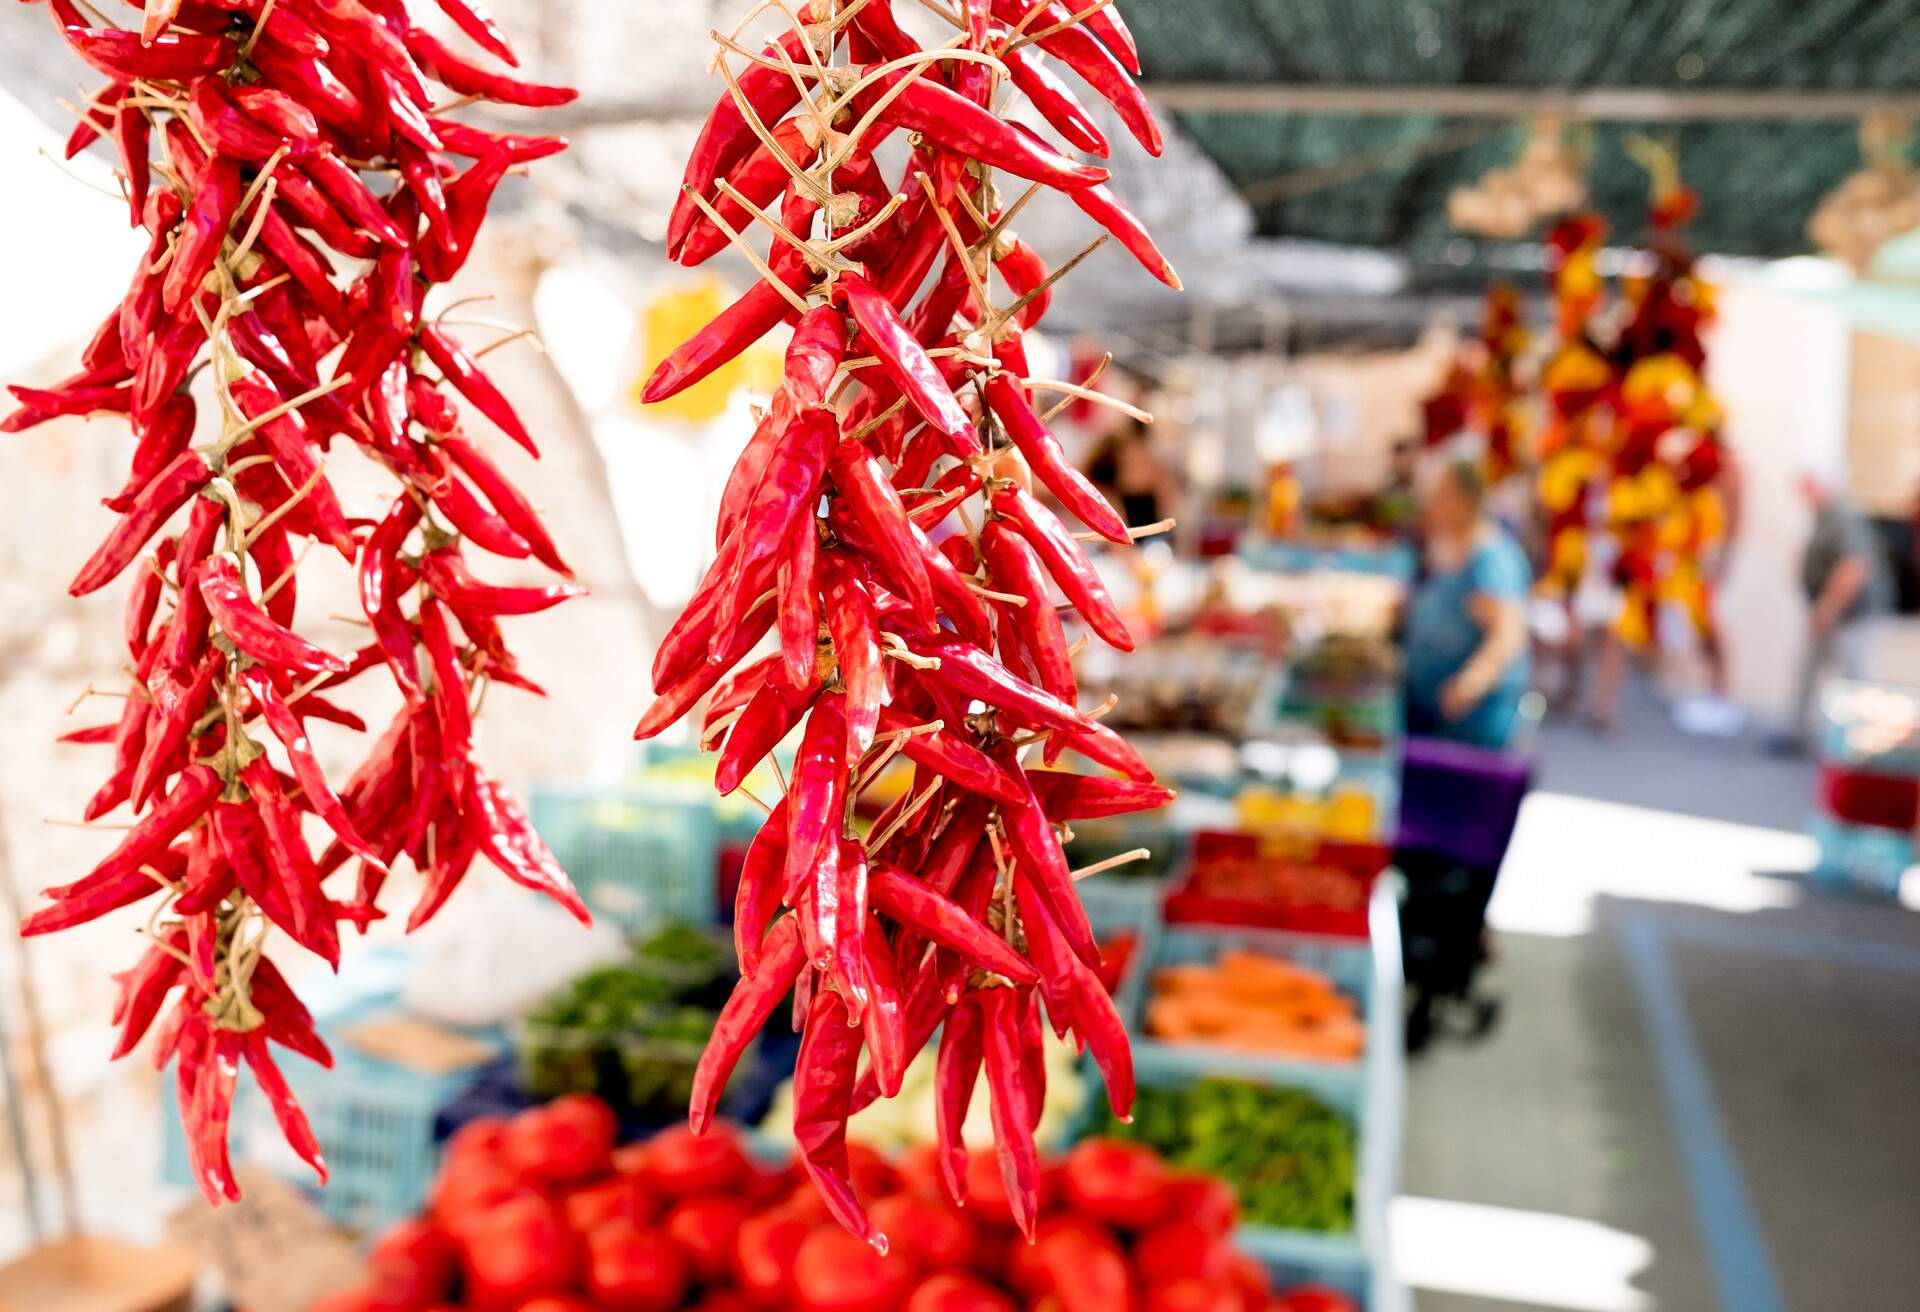 close up of red hor chili pepper hangin at organic farmers market stalls with people in background during sunny summer day